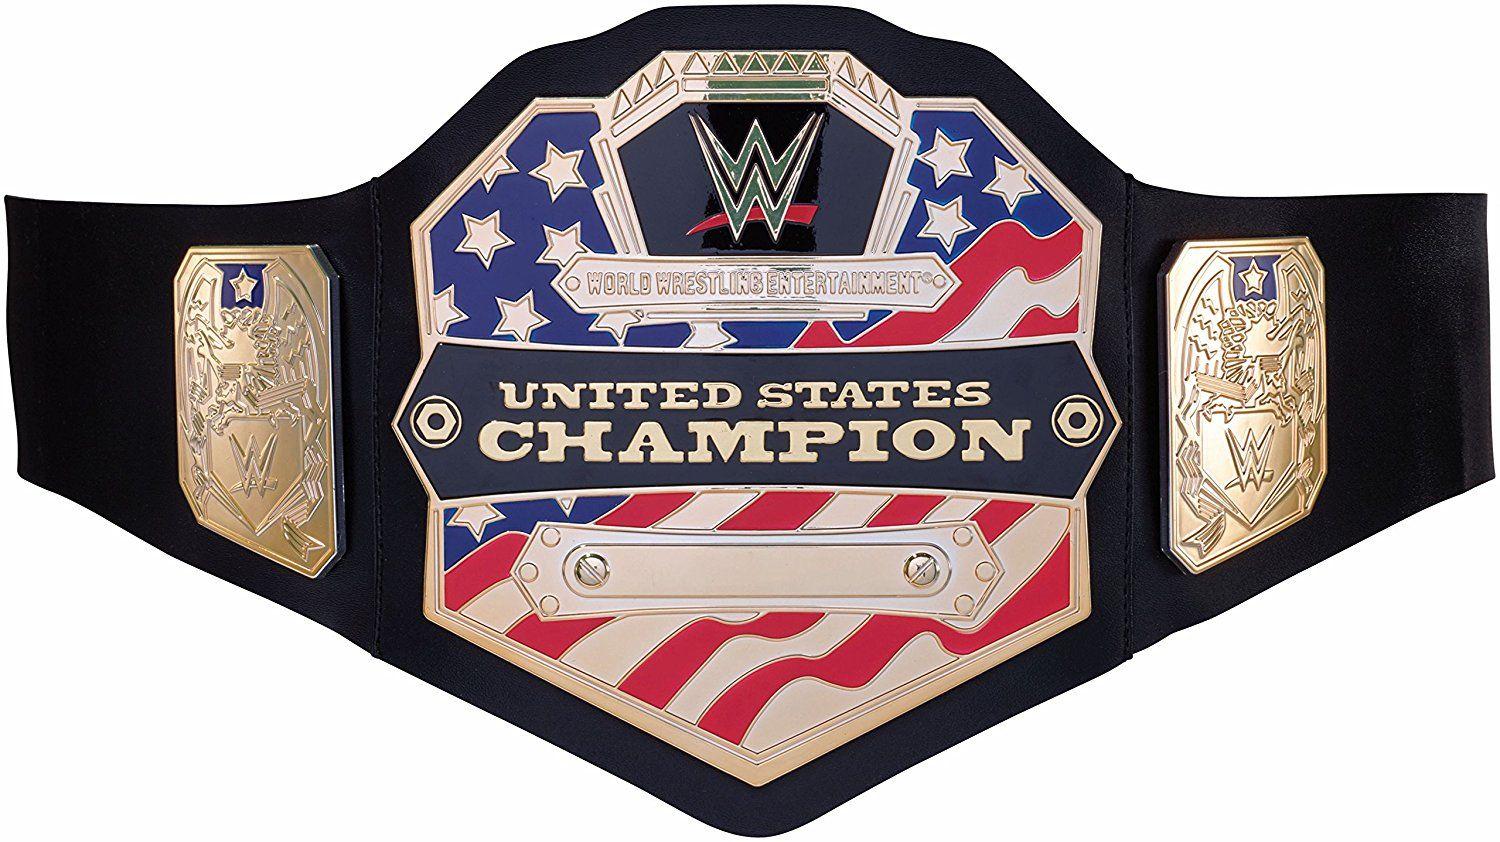 Buy WWE United States Championship Belt Online at Low Prices